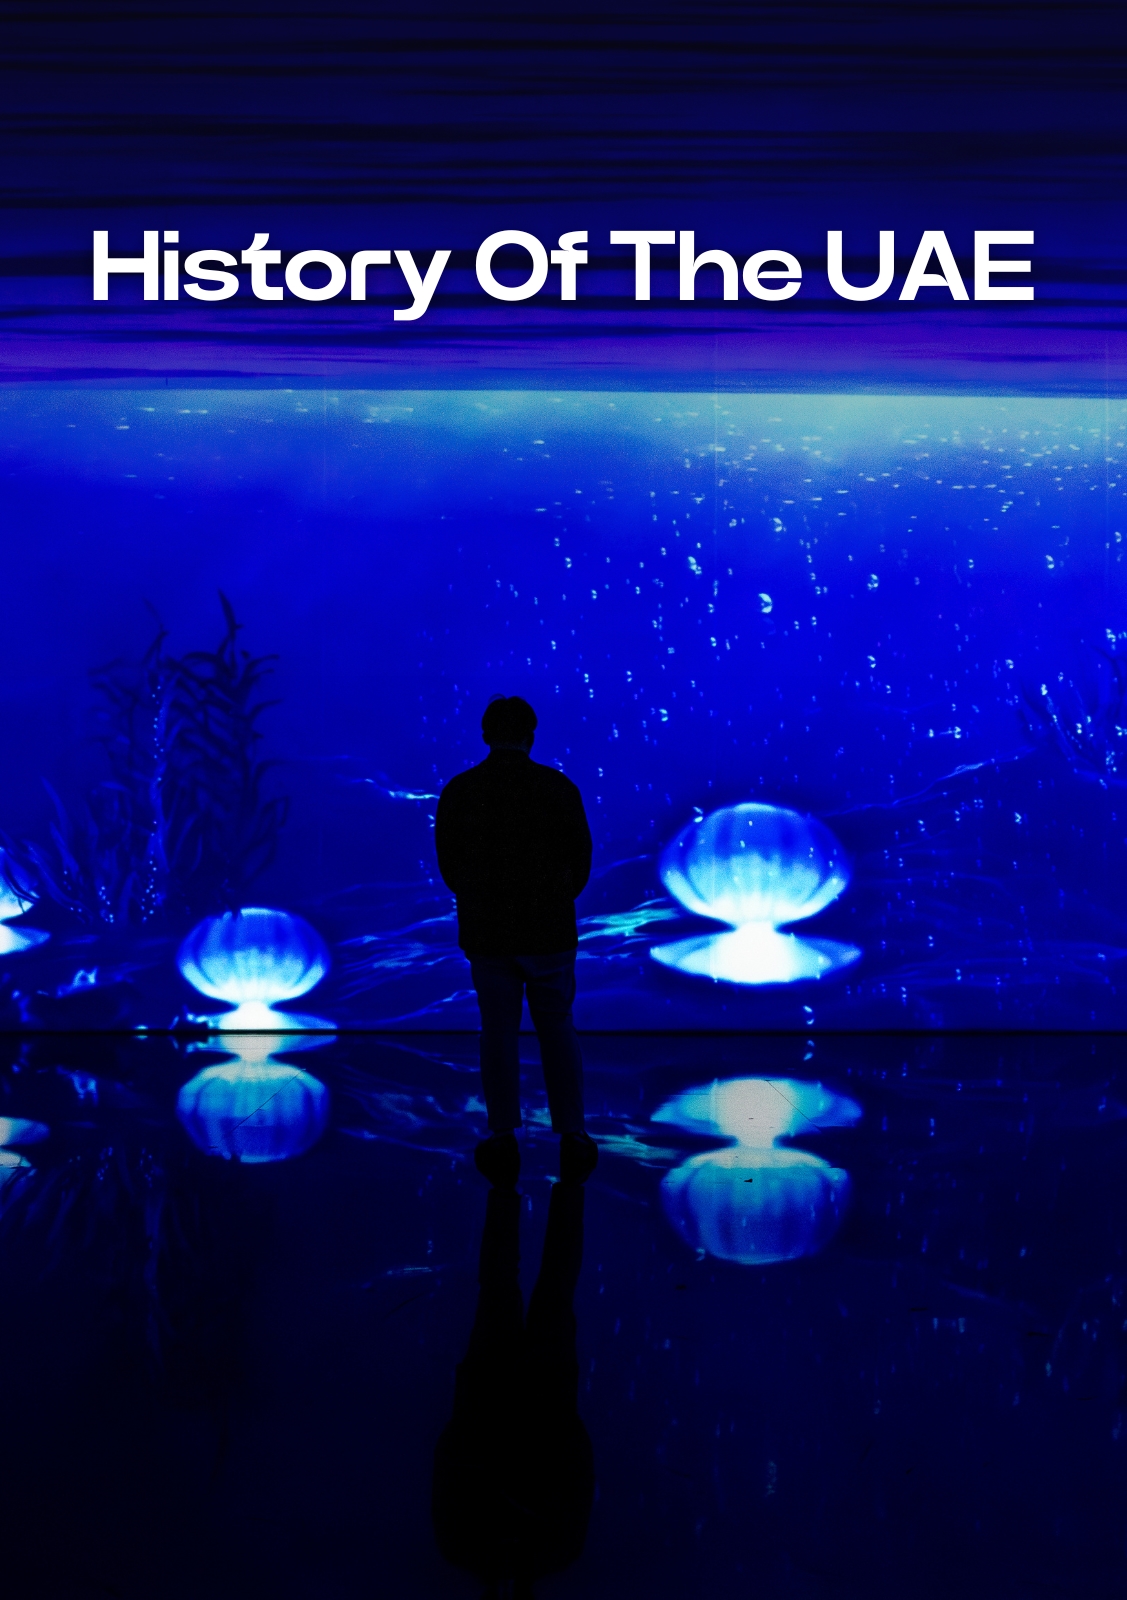 History of the UAE